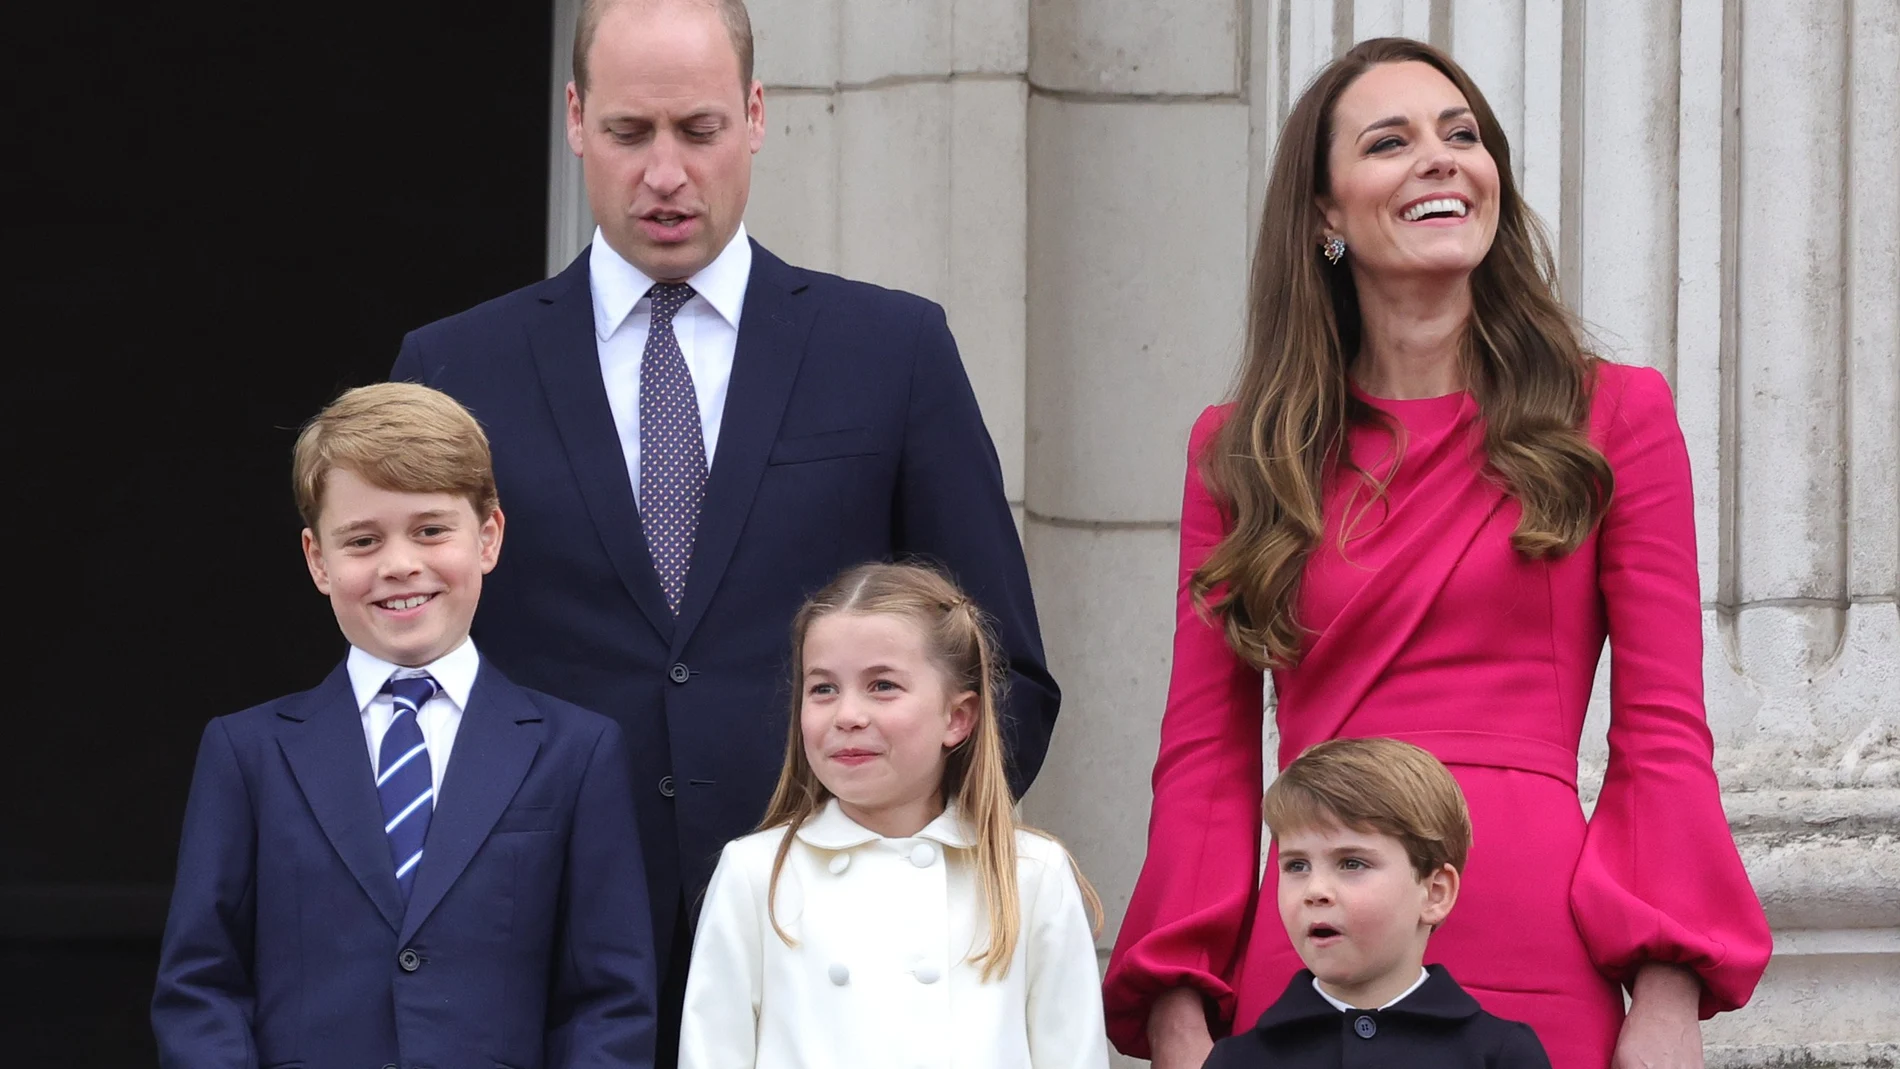 FILE - Britain's Prince William, Kate, Duchess of Cambridge, Prince George, Princess Charlotte and Prince Louis, appear on the balcony of Buckingham Palace, during the Platinum Jubilee Pageant outside Buckingham Palace in London, June 5, 2022. Prince William and his wife, Kate, will relocate their family from central London to more rural dwellings in Windsor, and all three of their children will attend the same private school near their new home, palace officials said Monday Aug. 22, 2022. (Chris Jackson/PA via AP, File)